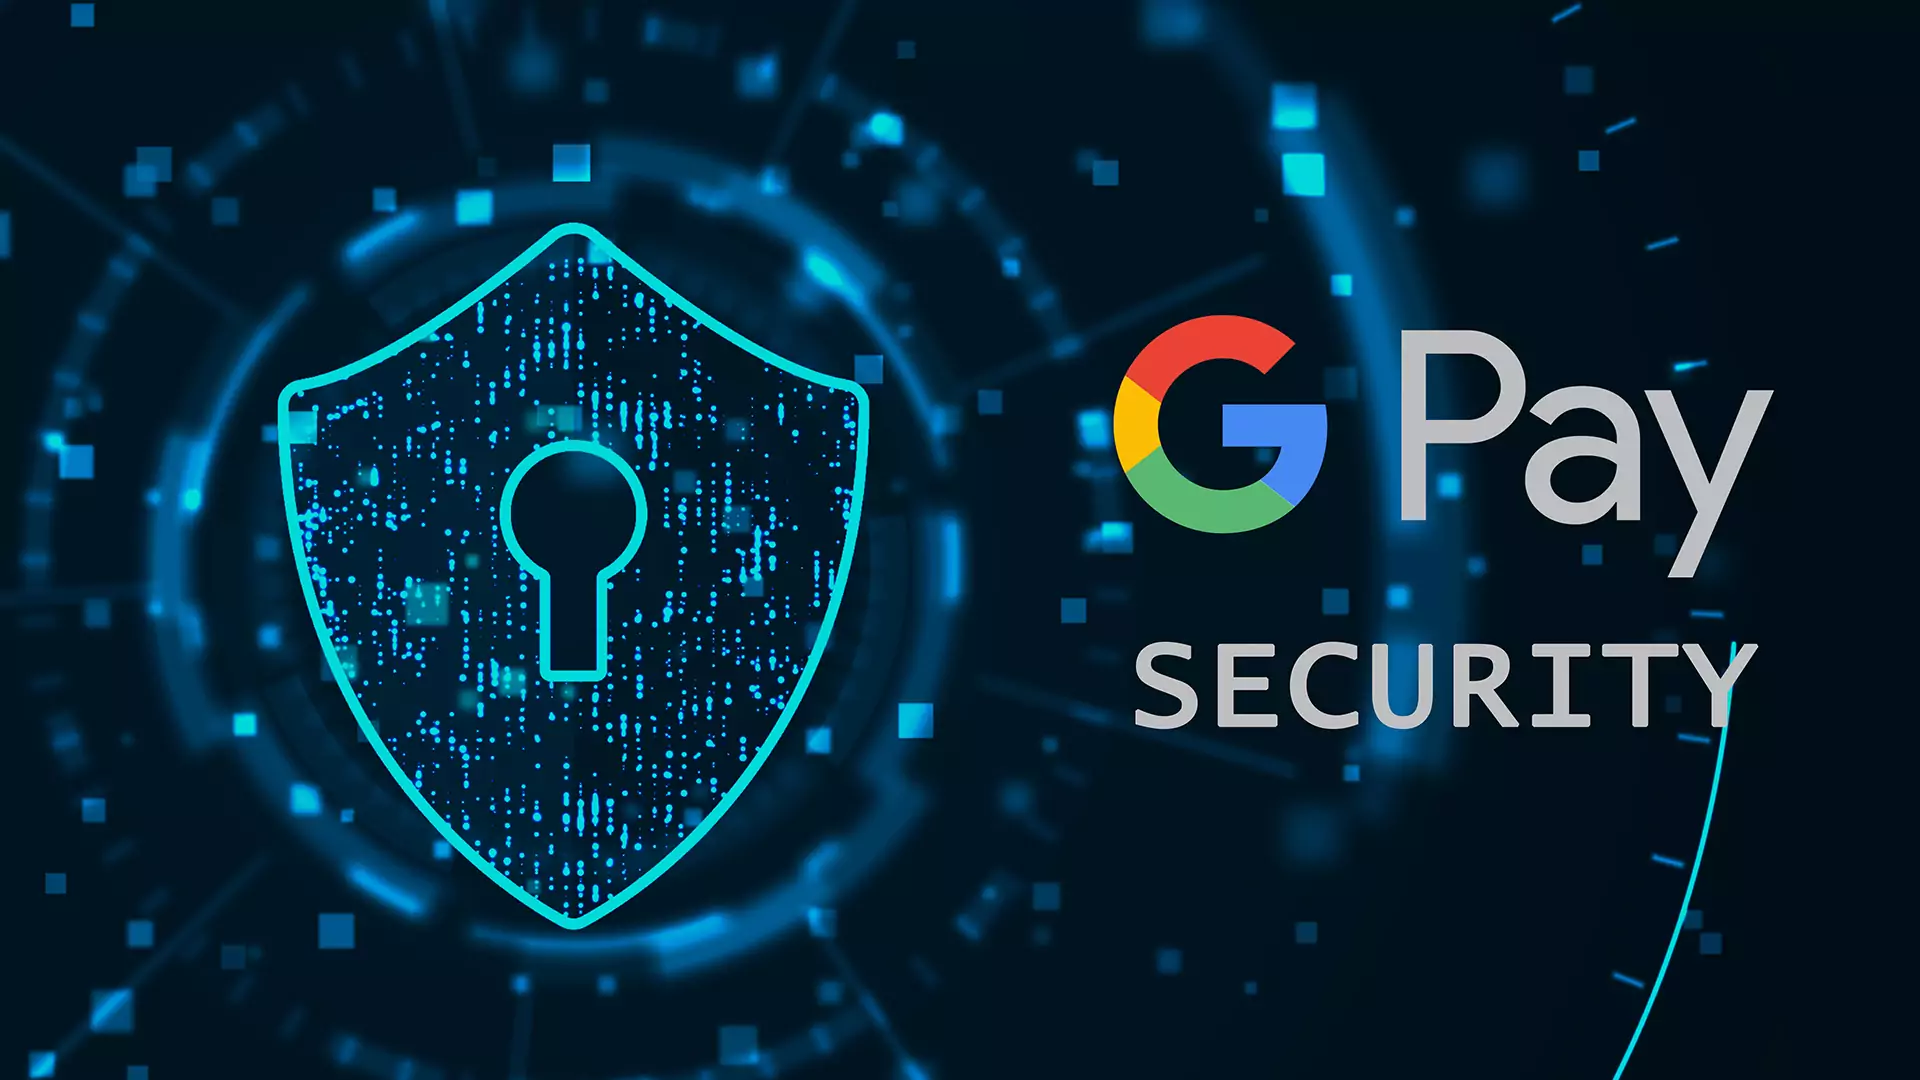 Using Google Pay is totally secure.